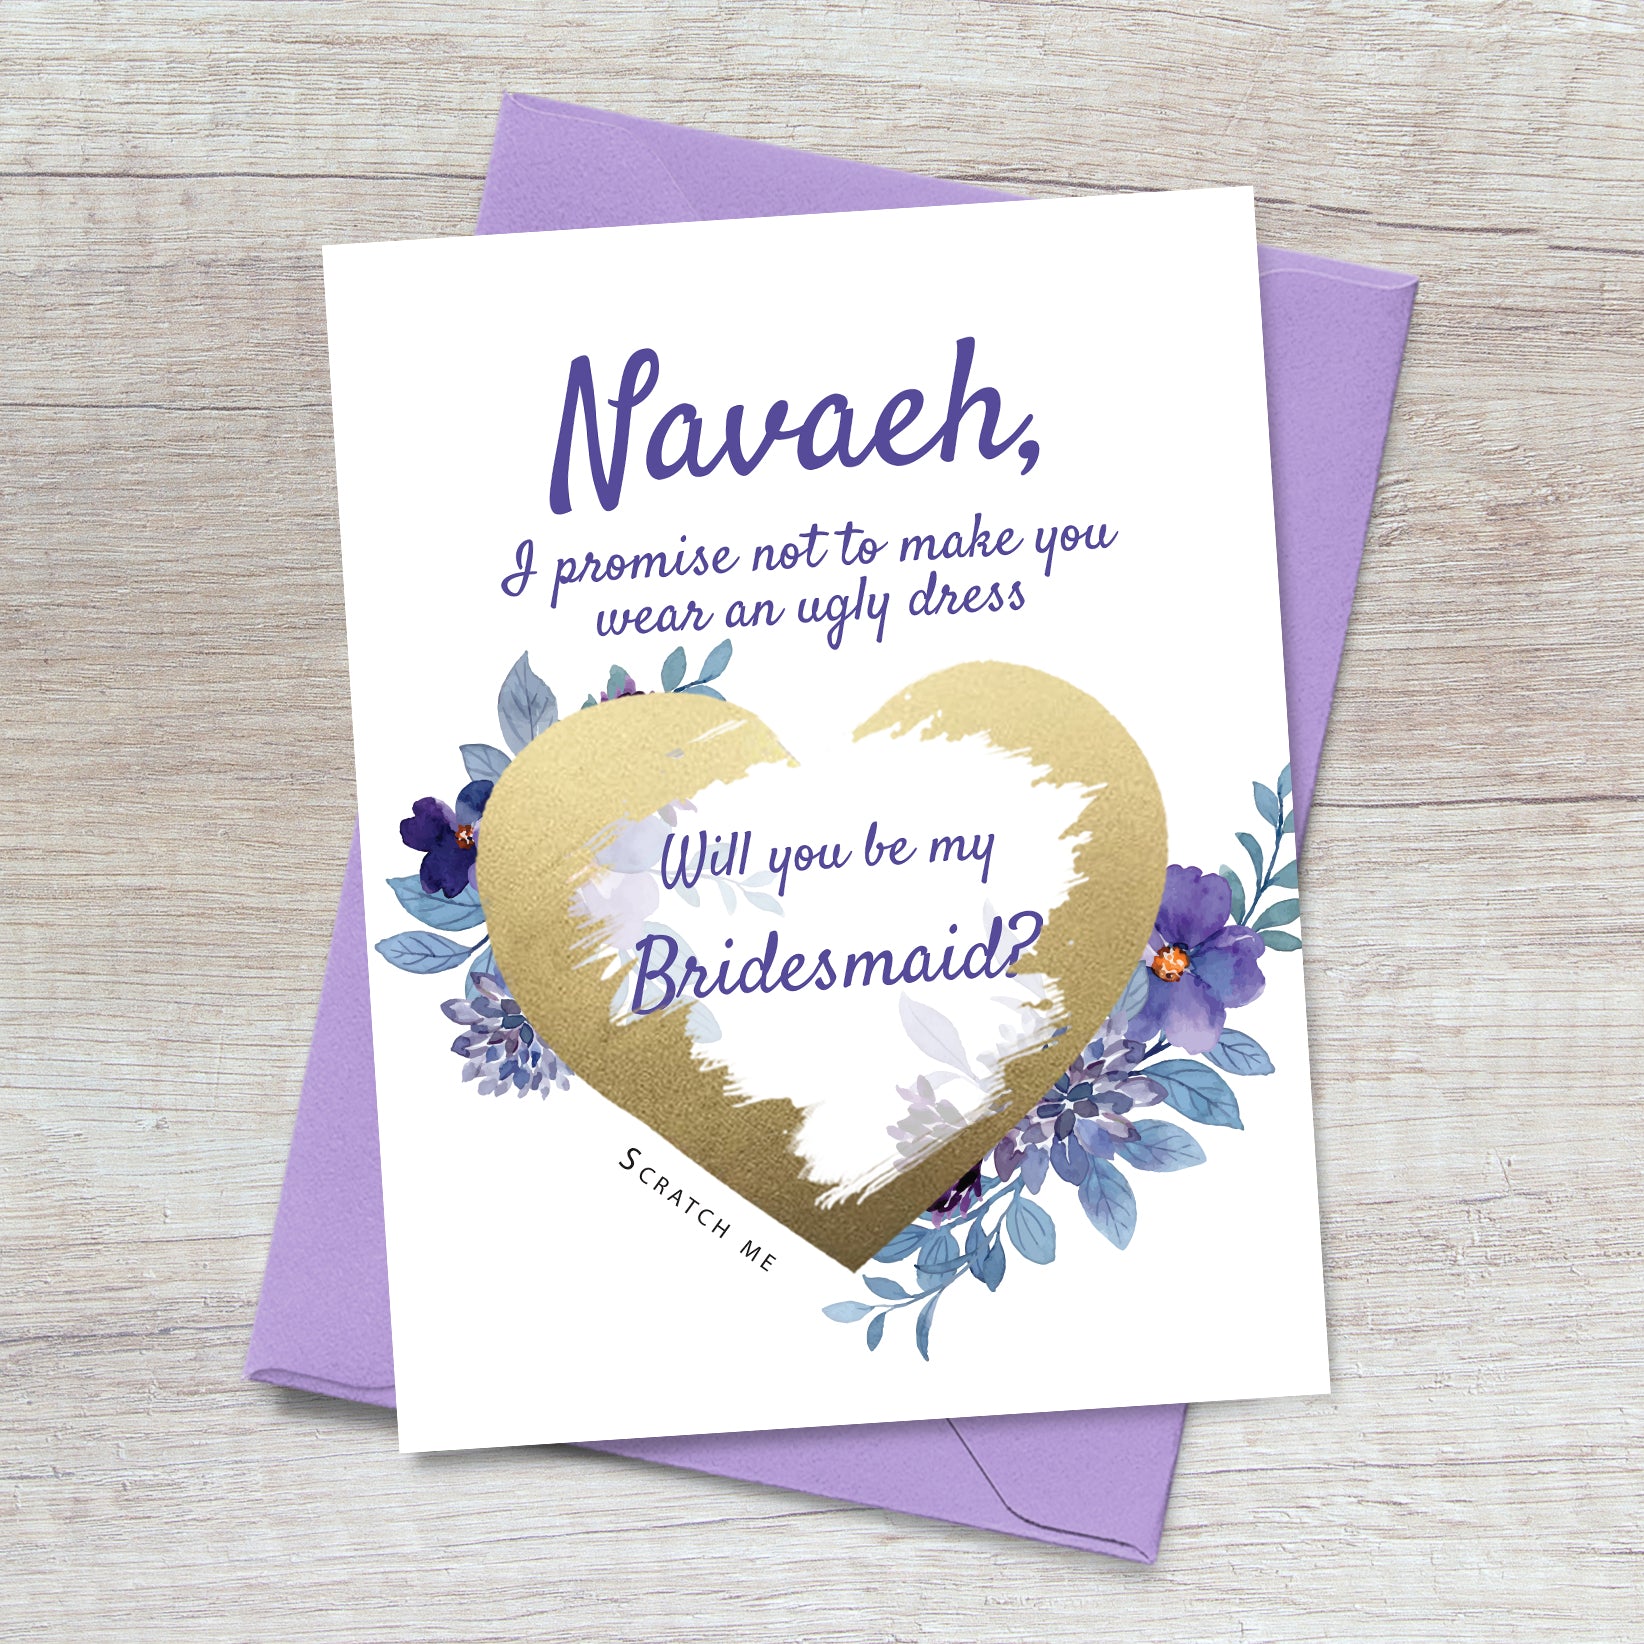 will you be my bridesmaid proposal card with purple-blue flower bouquet - XOXOKristen